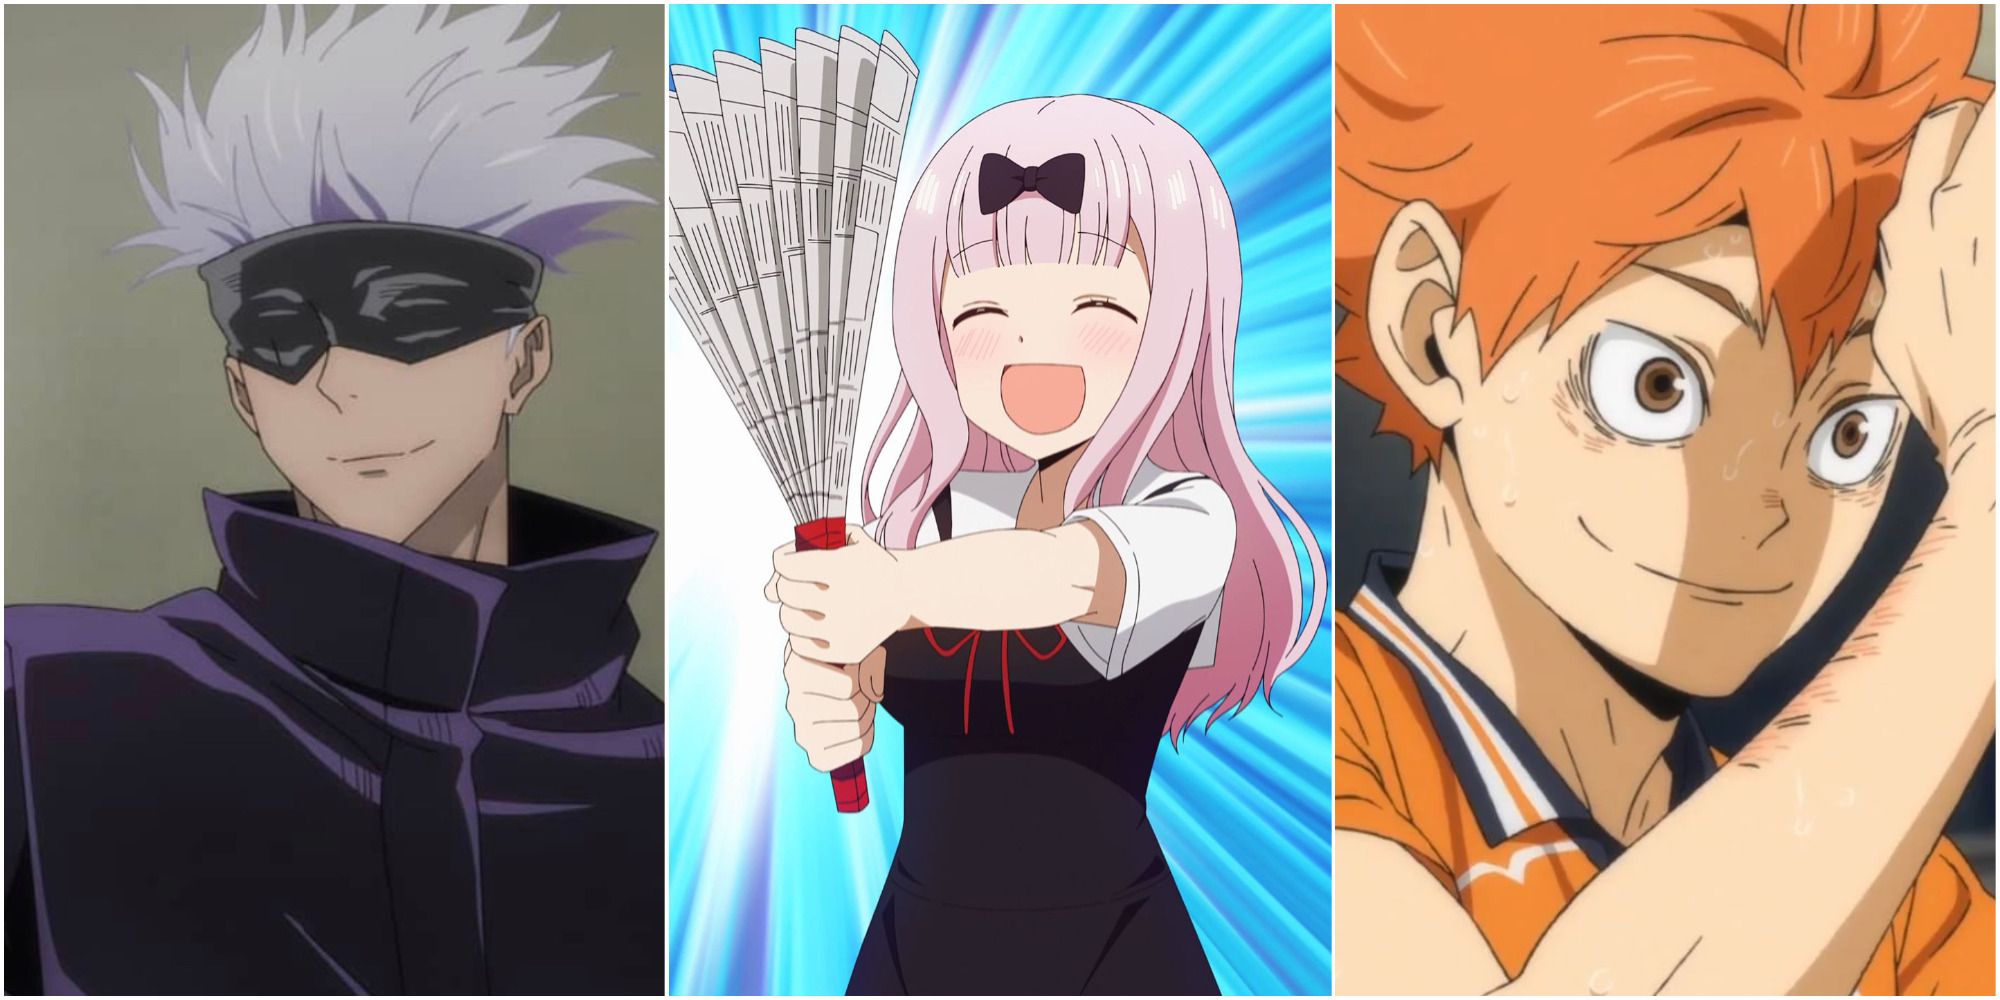 10 Most Popular Anime Characters Of 2020 According To MyAnimeList 